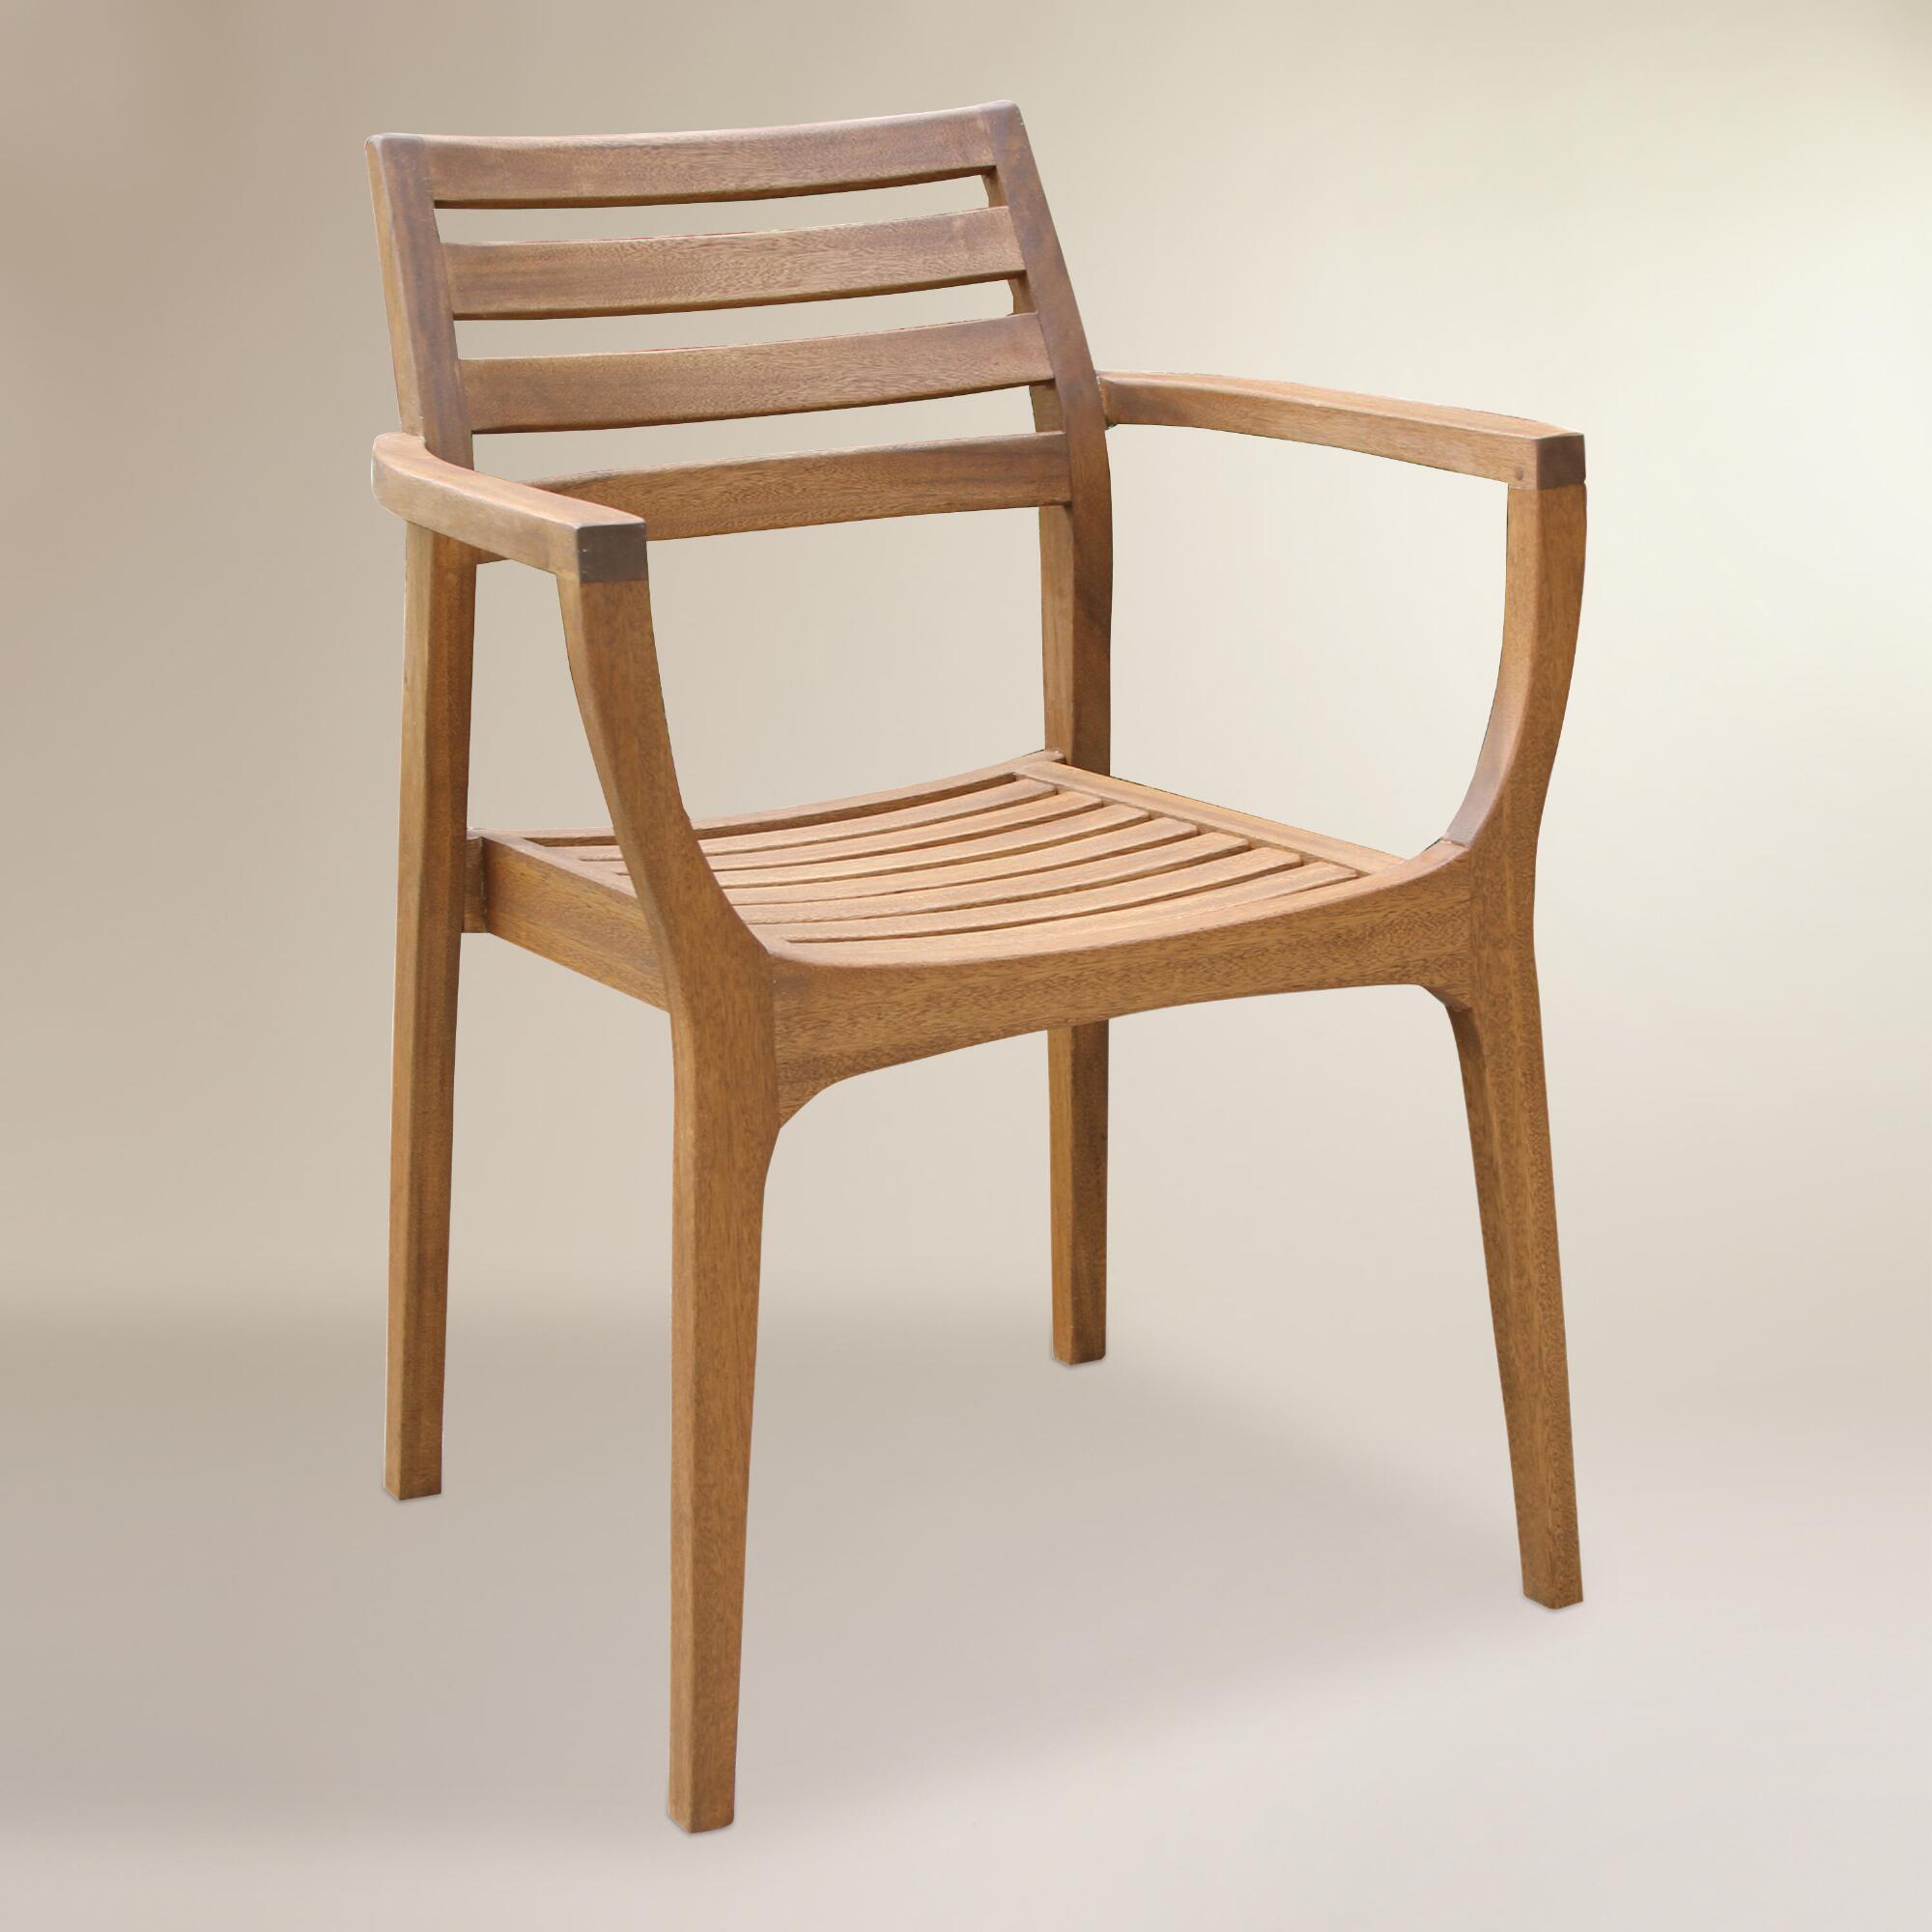 City Farmhouse - Outdoor Dining Chairs